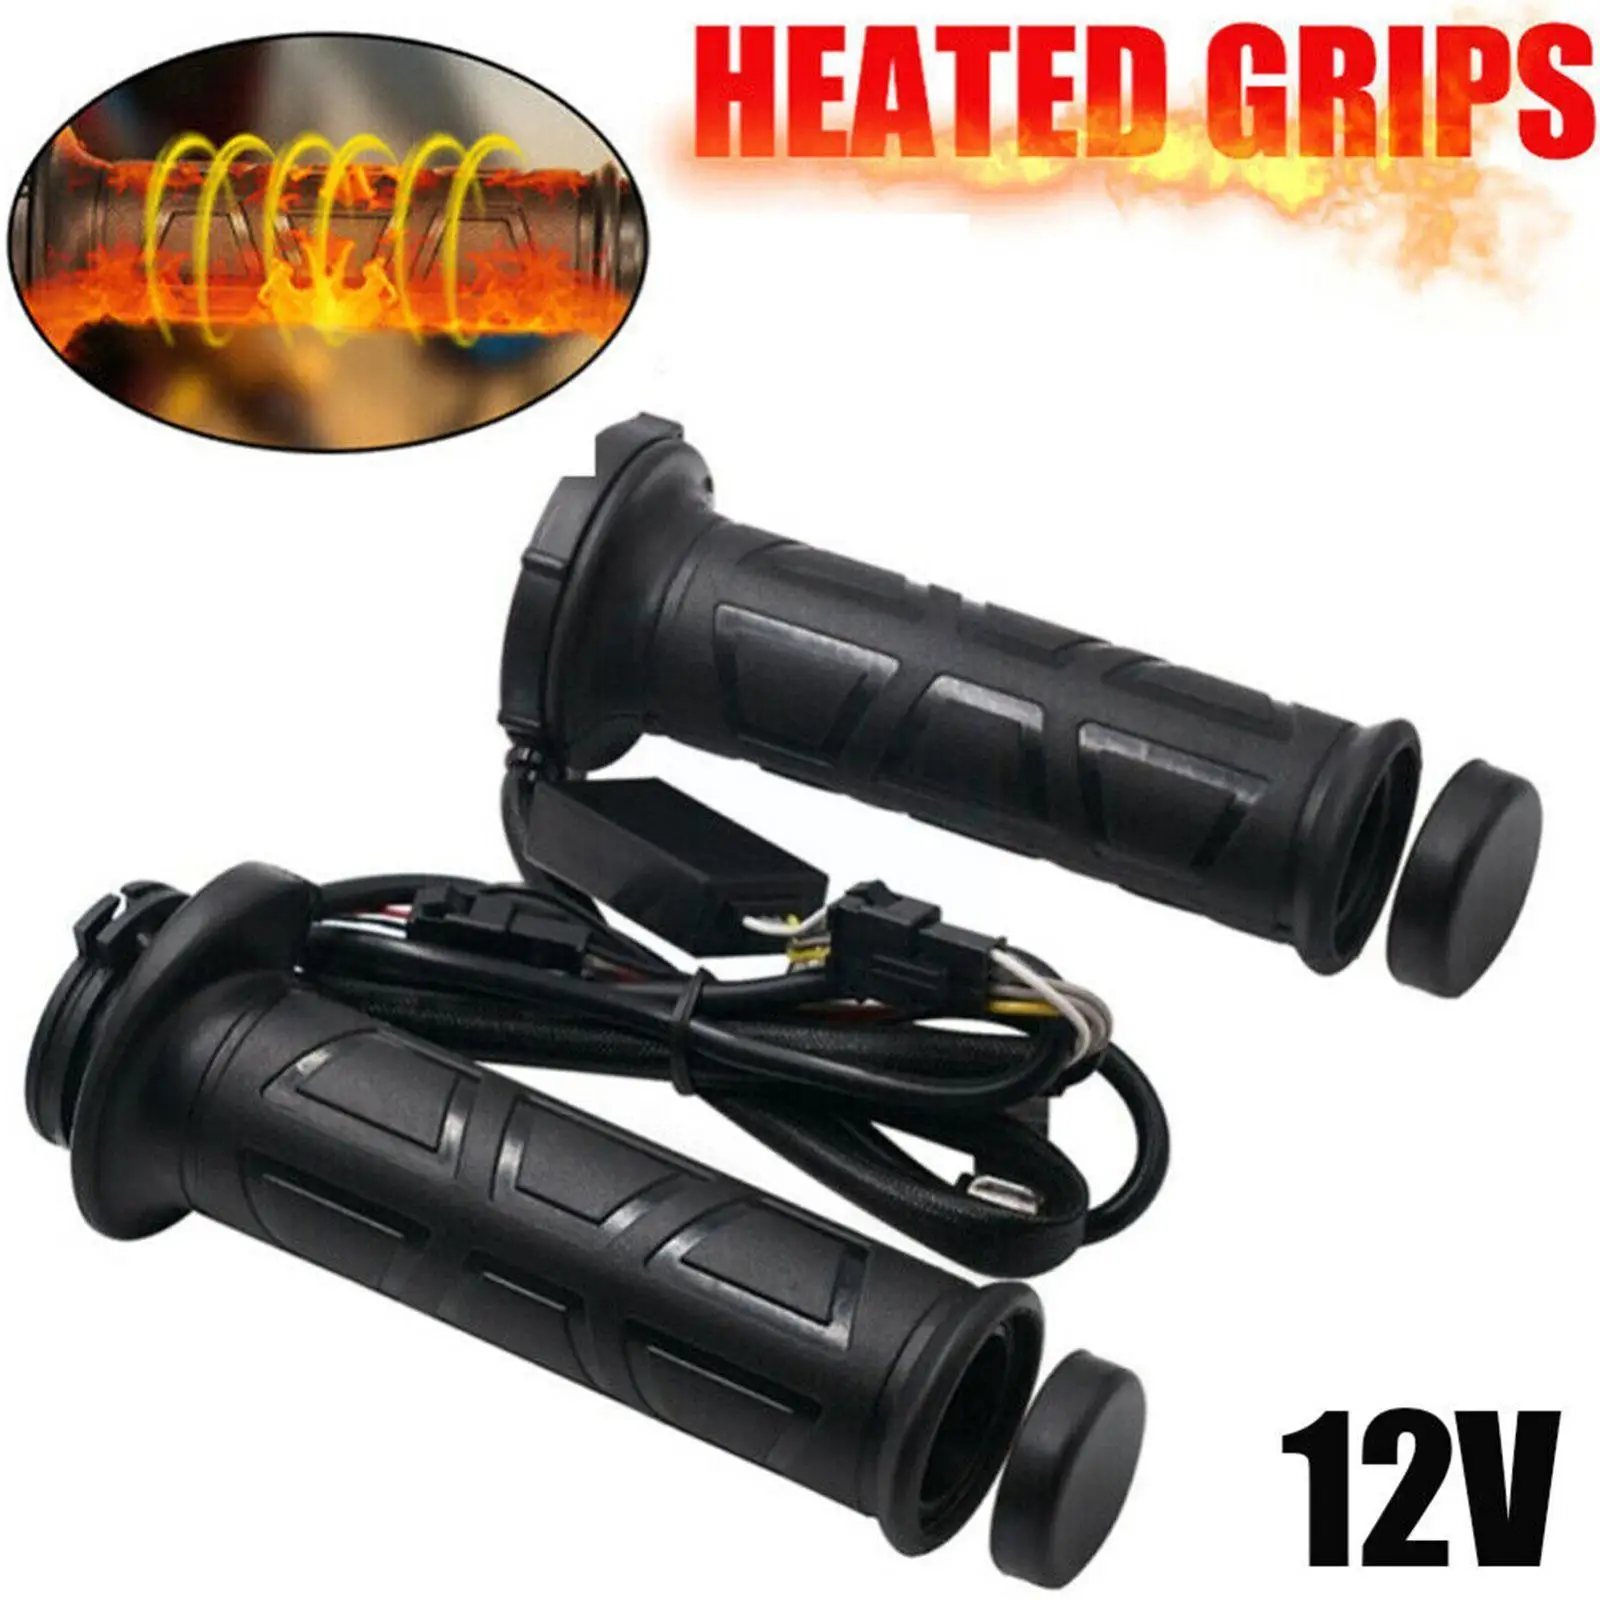 

Motorcycle Hand Heated Grips Electric Molded Grips Bar 22mm Hot Grip Handle Motocross Adjustable 12V Moped Warmer Scooter H J9B6